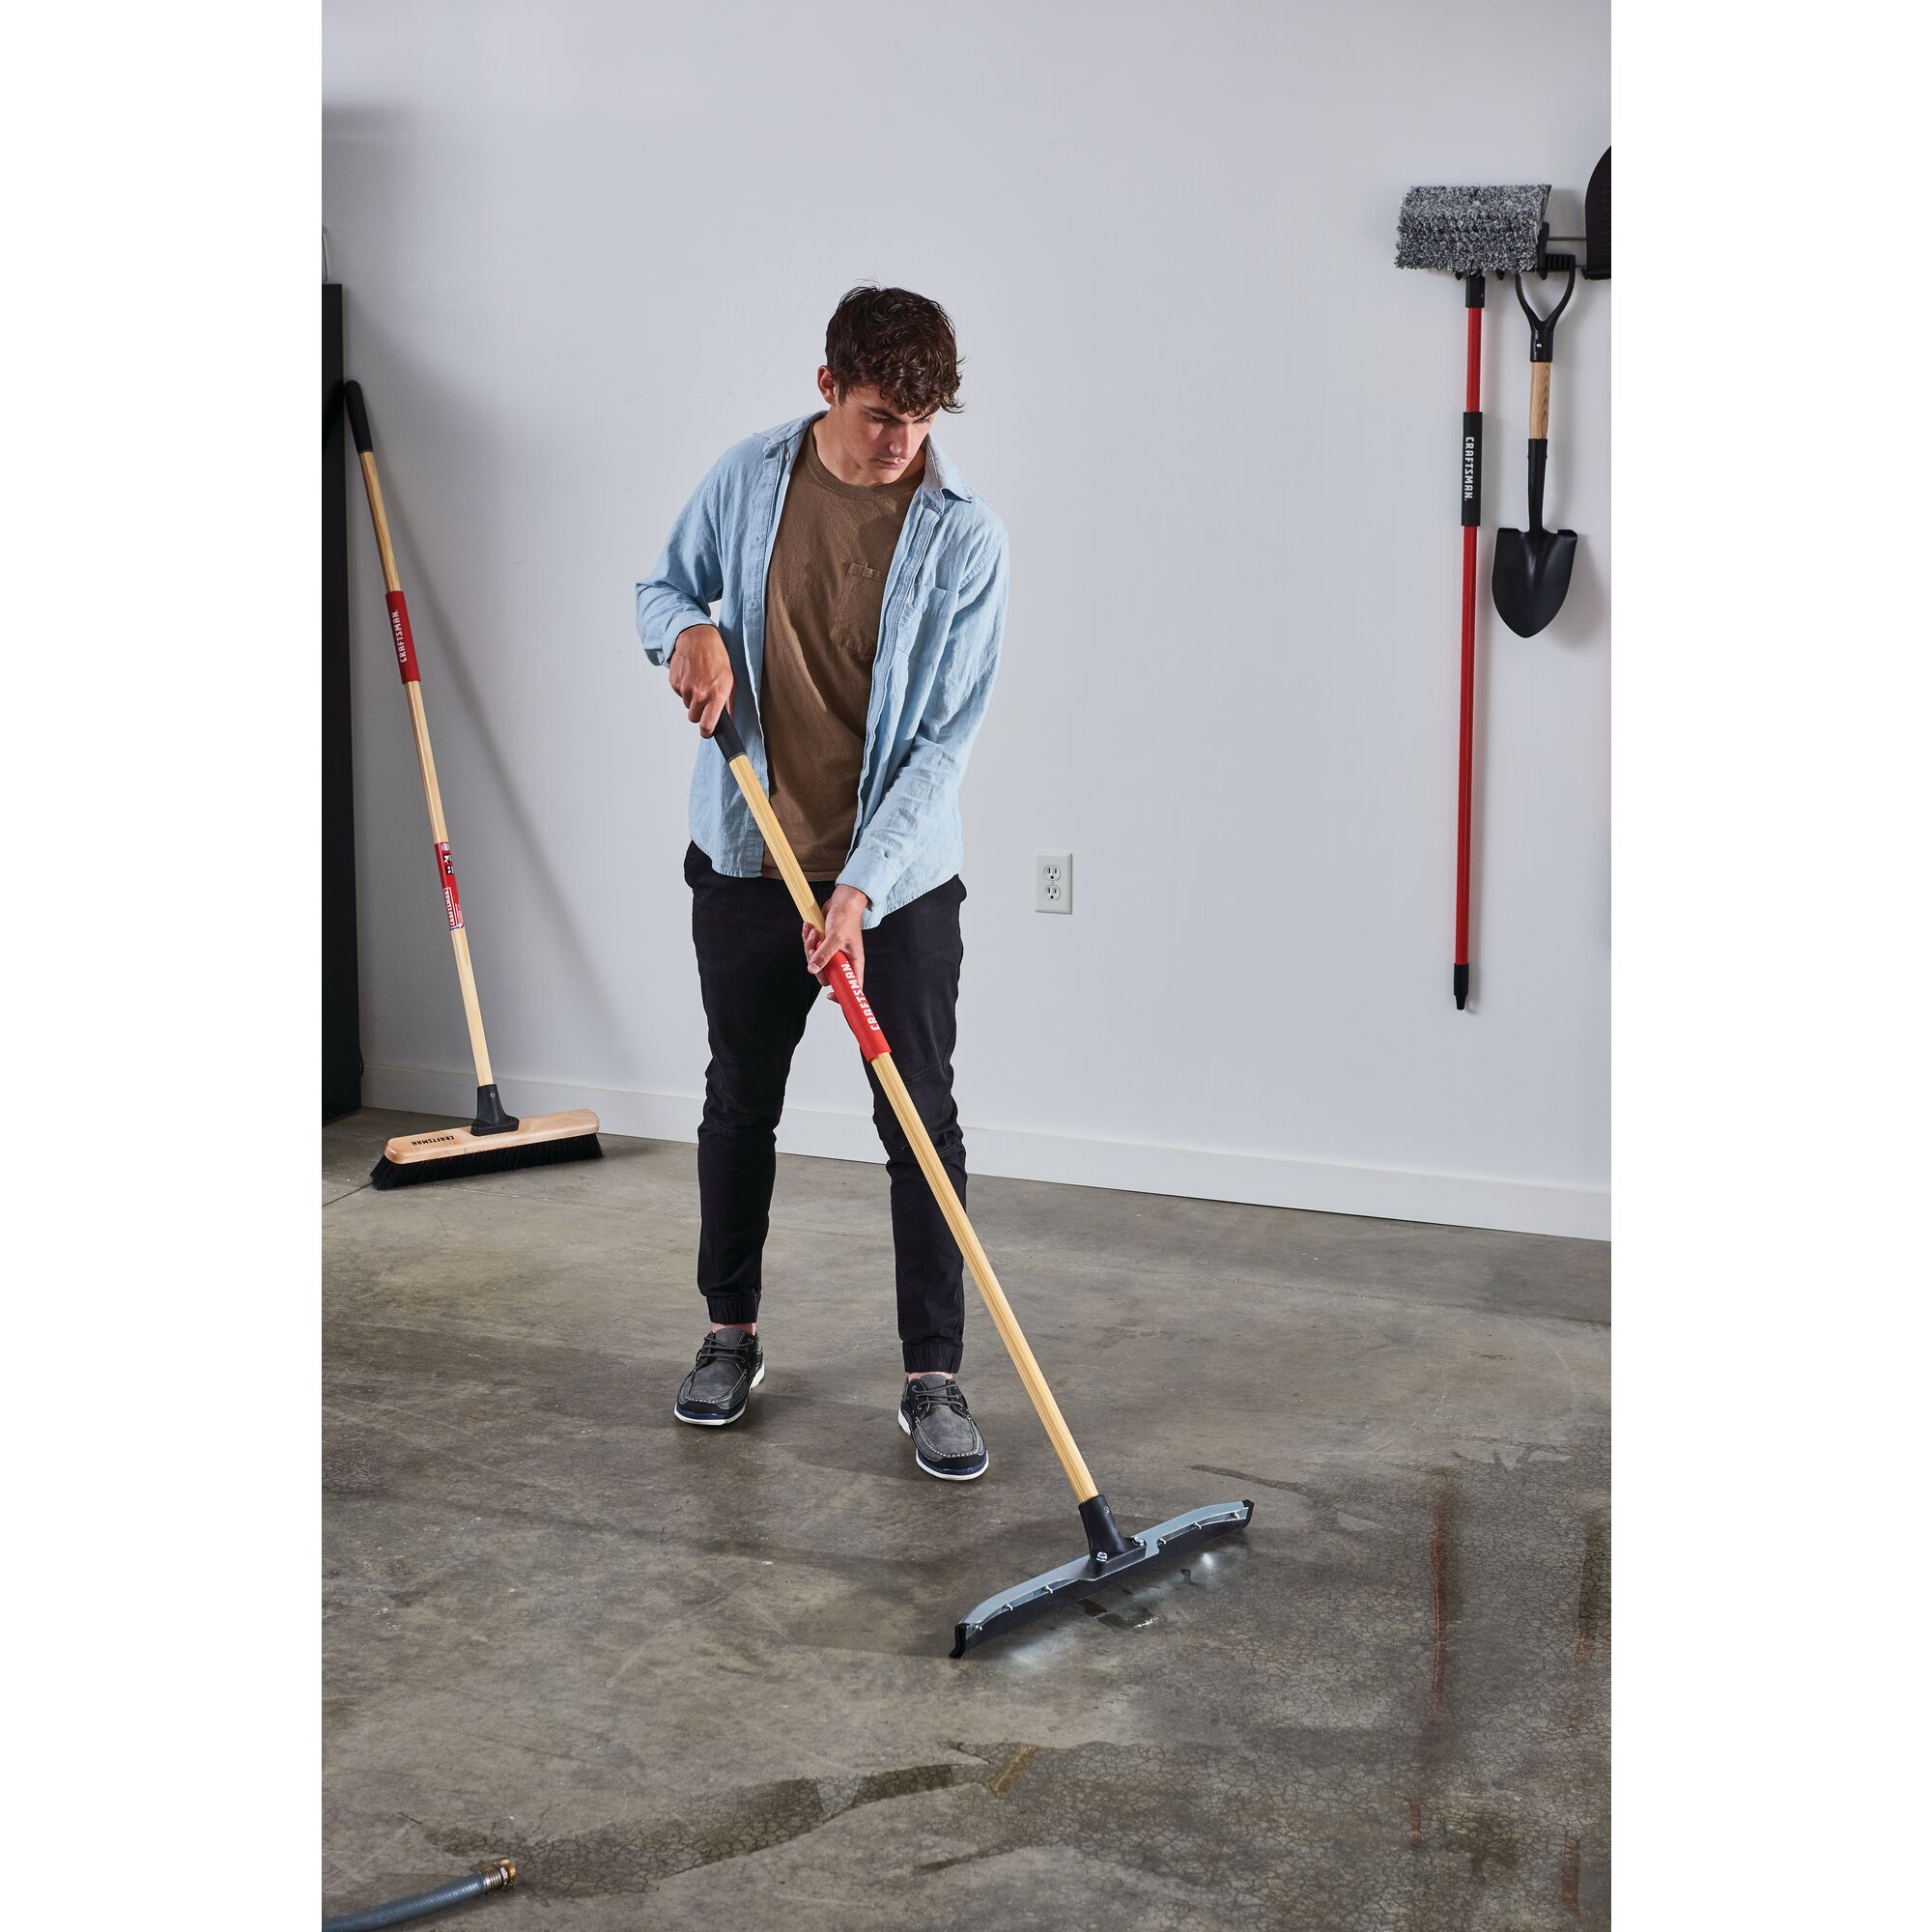 24 inch dual blade floor squeegee being used by a person.